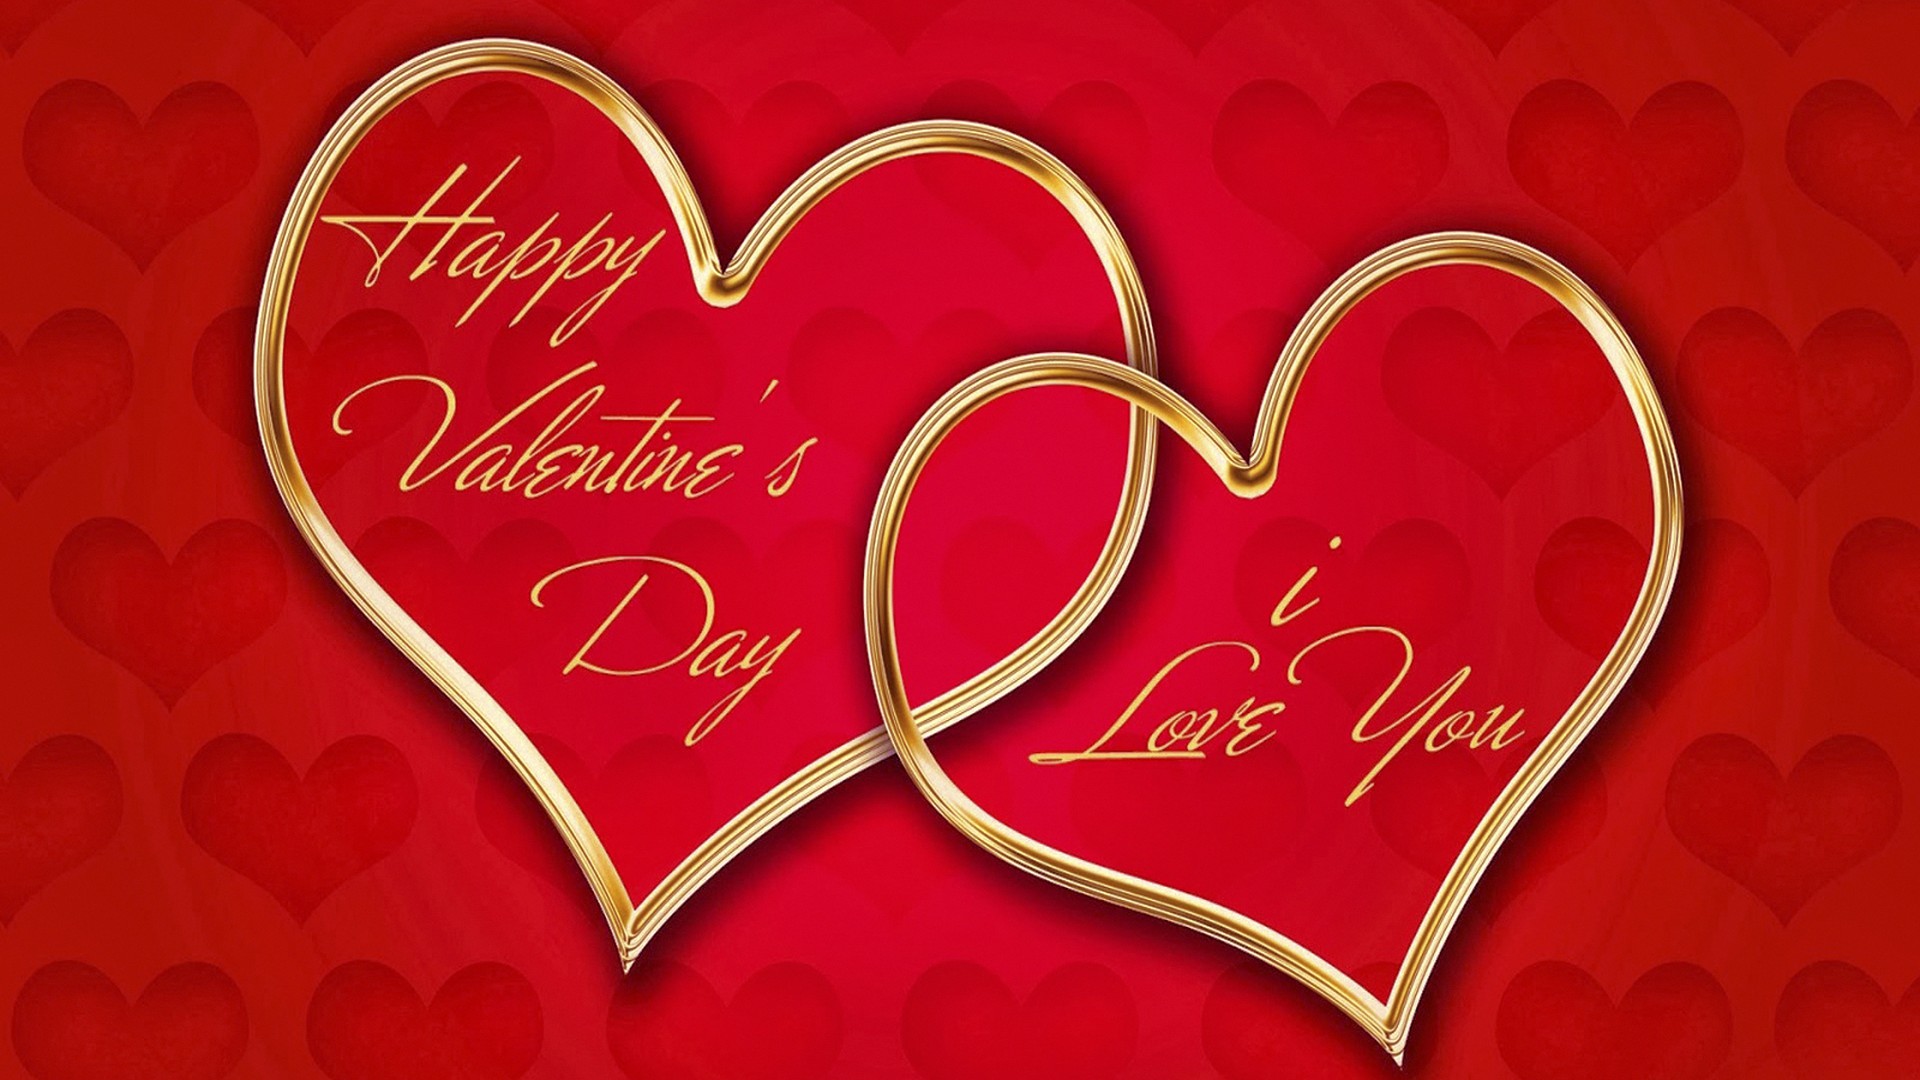 i love you wallpaper,heart,red,love,text,valentine's day